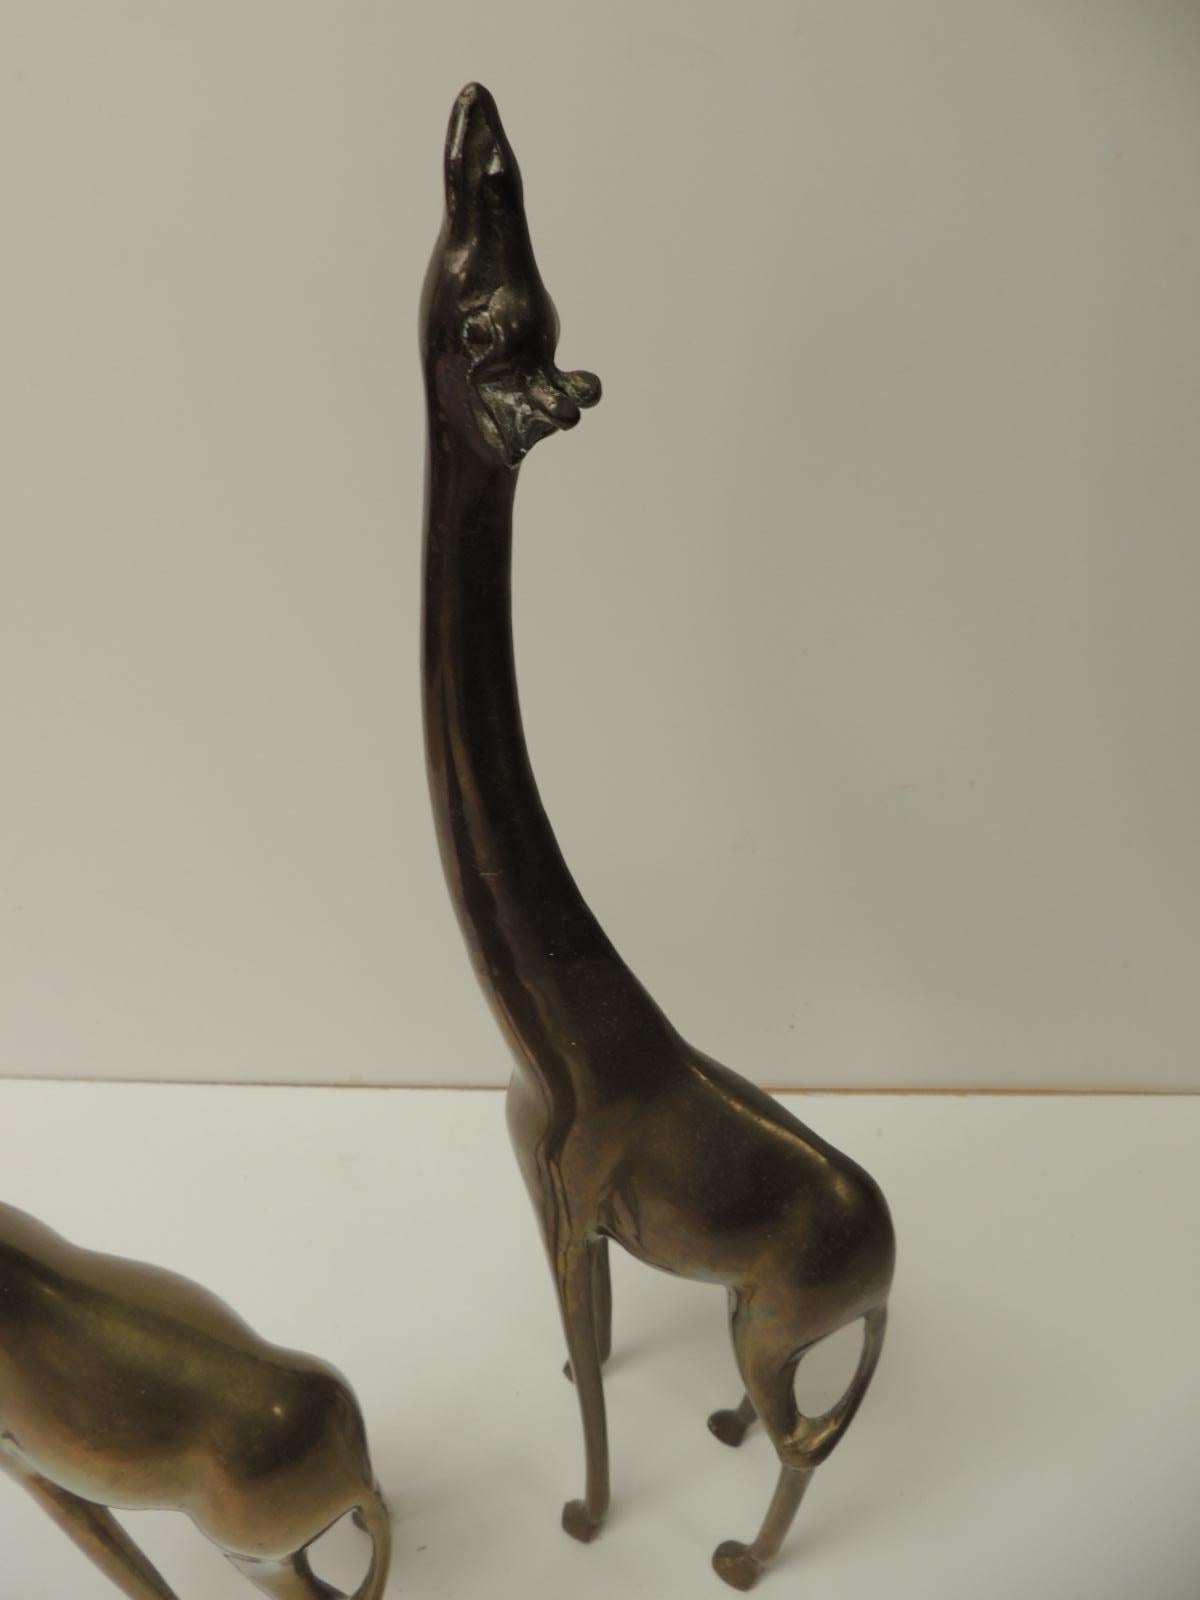 Pair of Mid-Century Modern Asian brass giraffes accent decor animals
Pair of male and female giraffes sculptures in antique brass finish. 
Asia, 1980.
Size: Male: 19” H x 6” D x 2.5” W
Size: Female: 11.5” H x 8” D x 3” W.
 